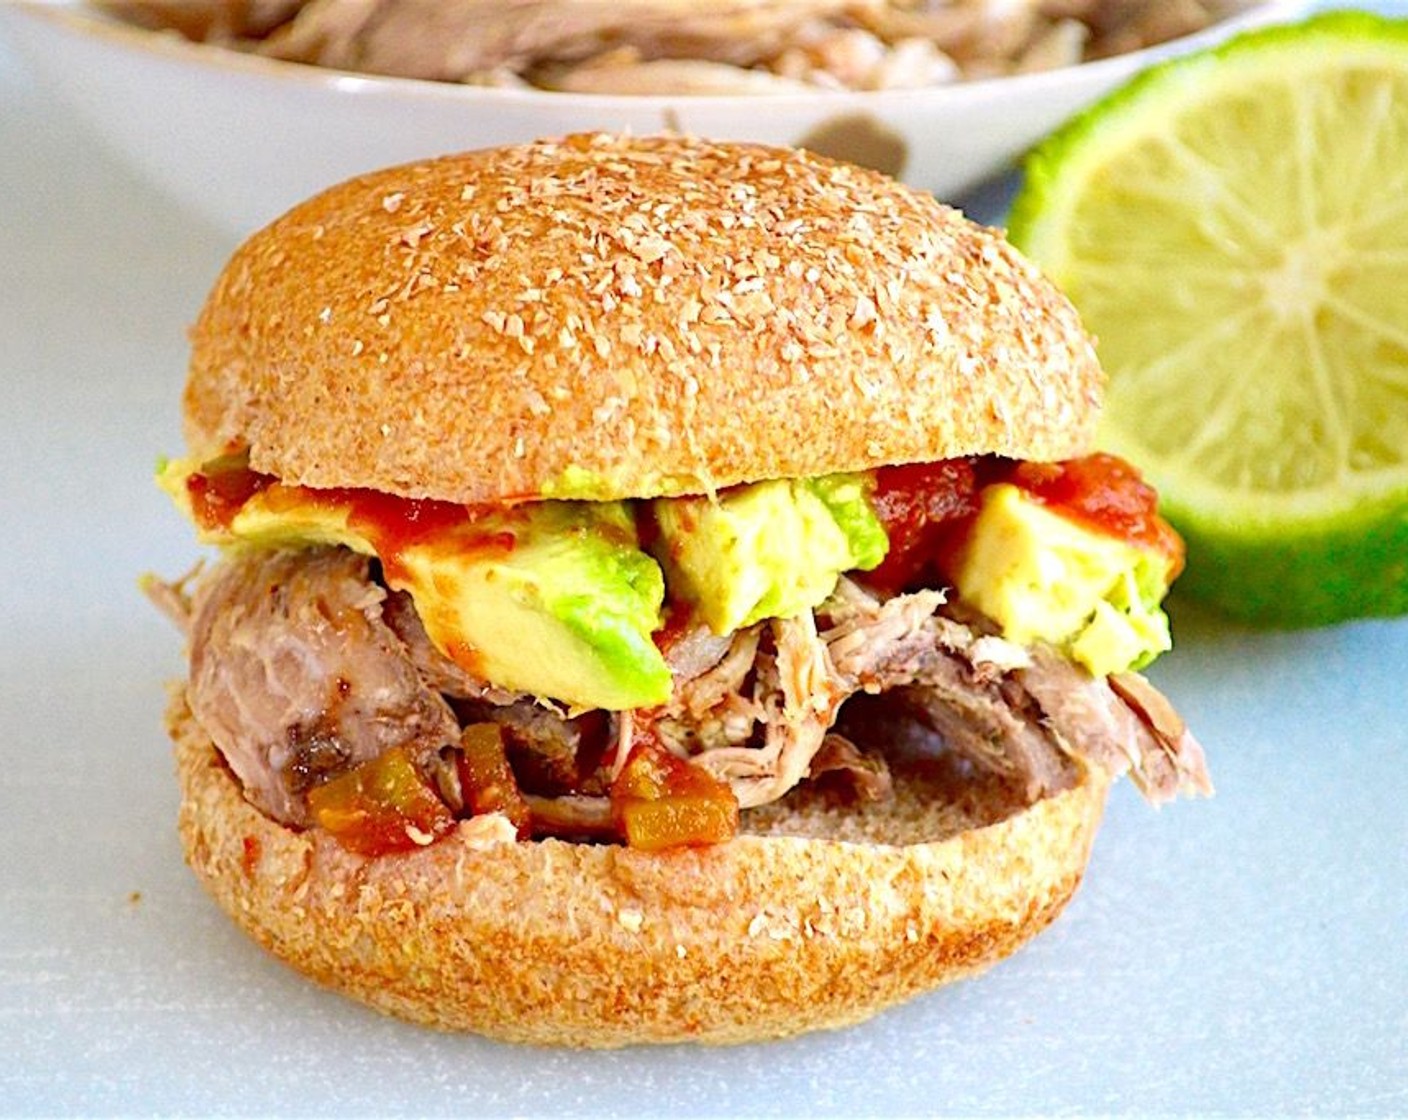 Tequila Lime Pulled Pork Sandwiches